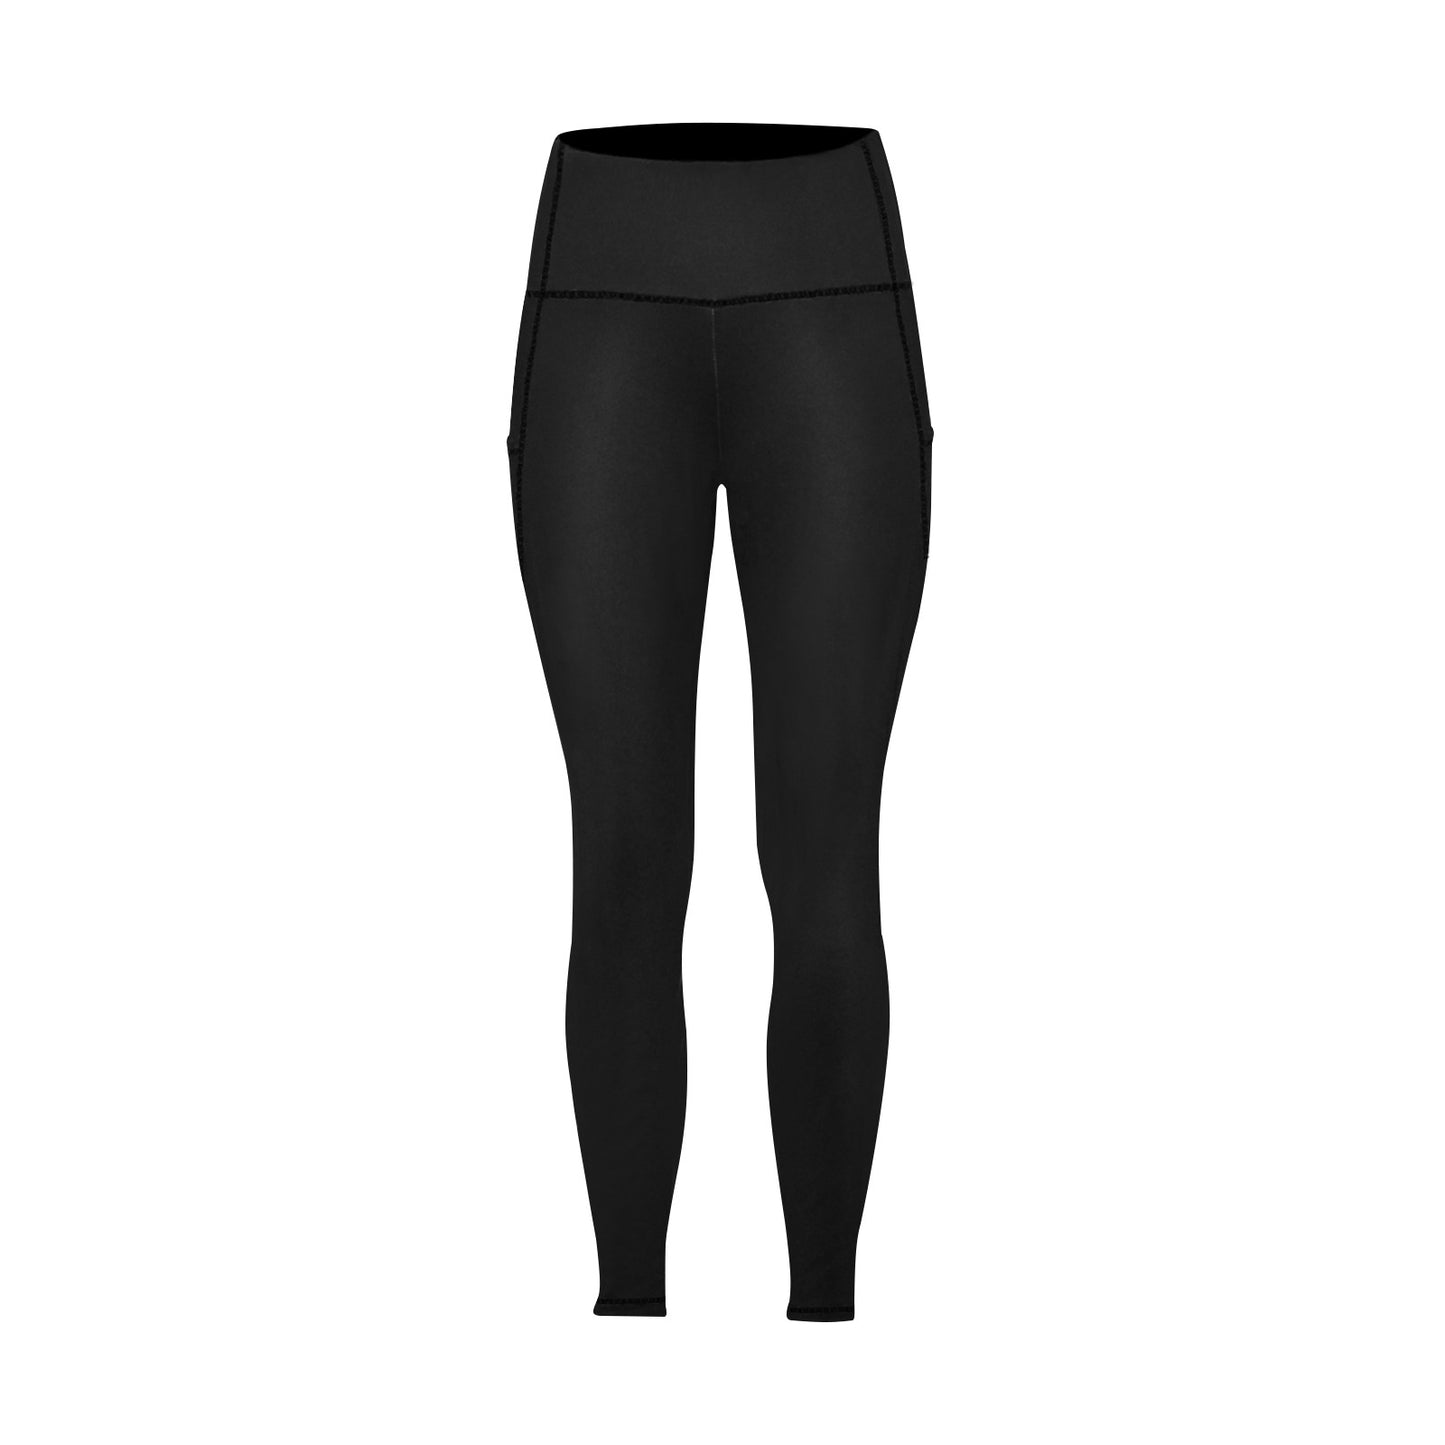 Black Women's Athletic Leggings With Pockets